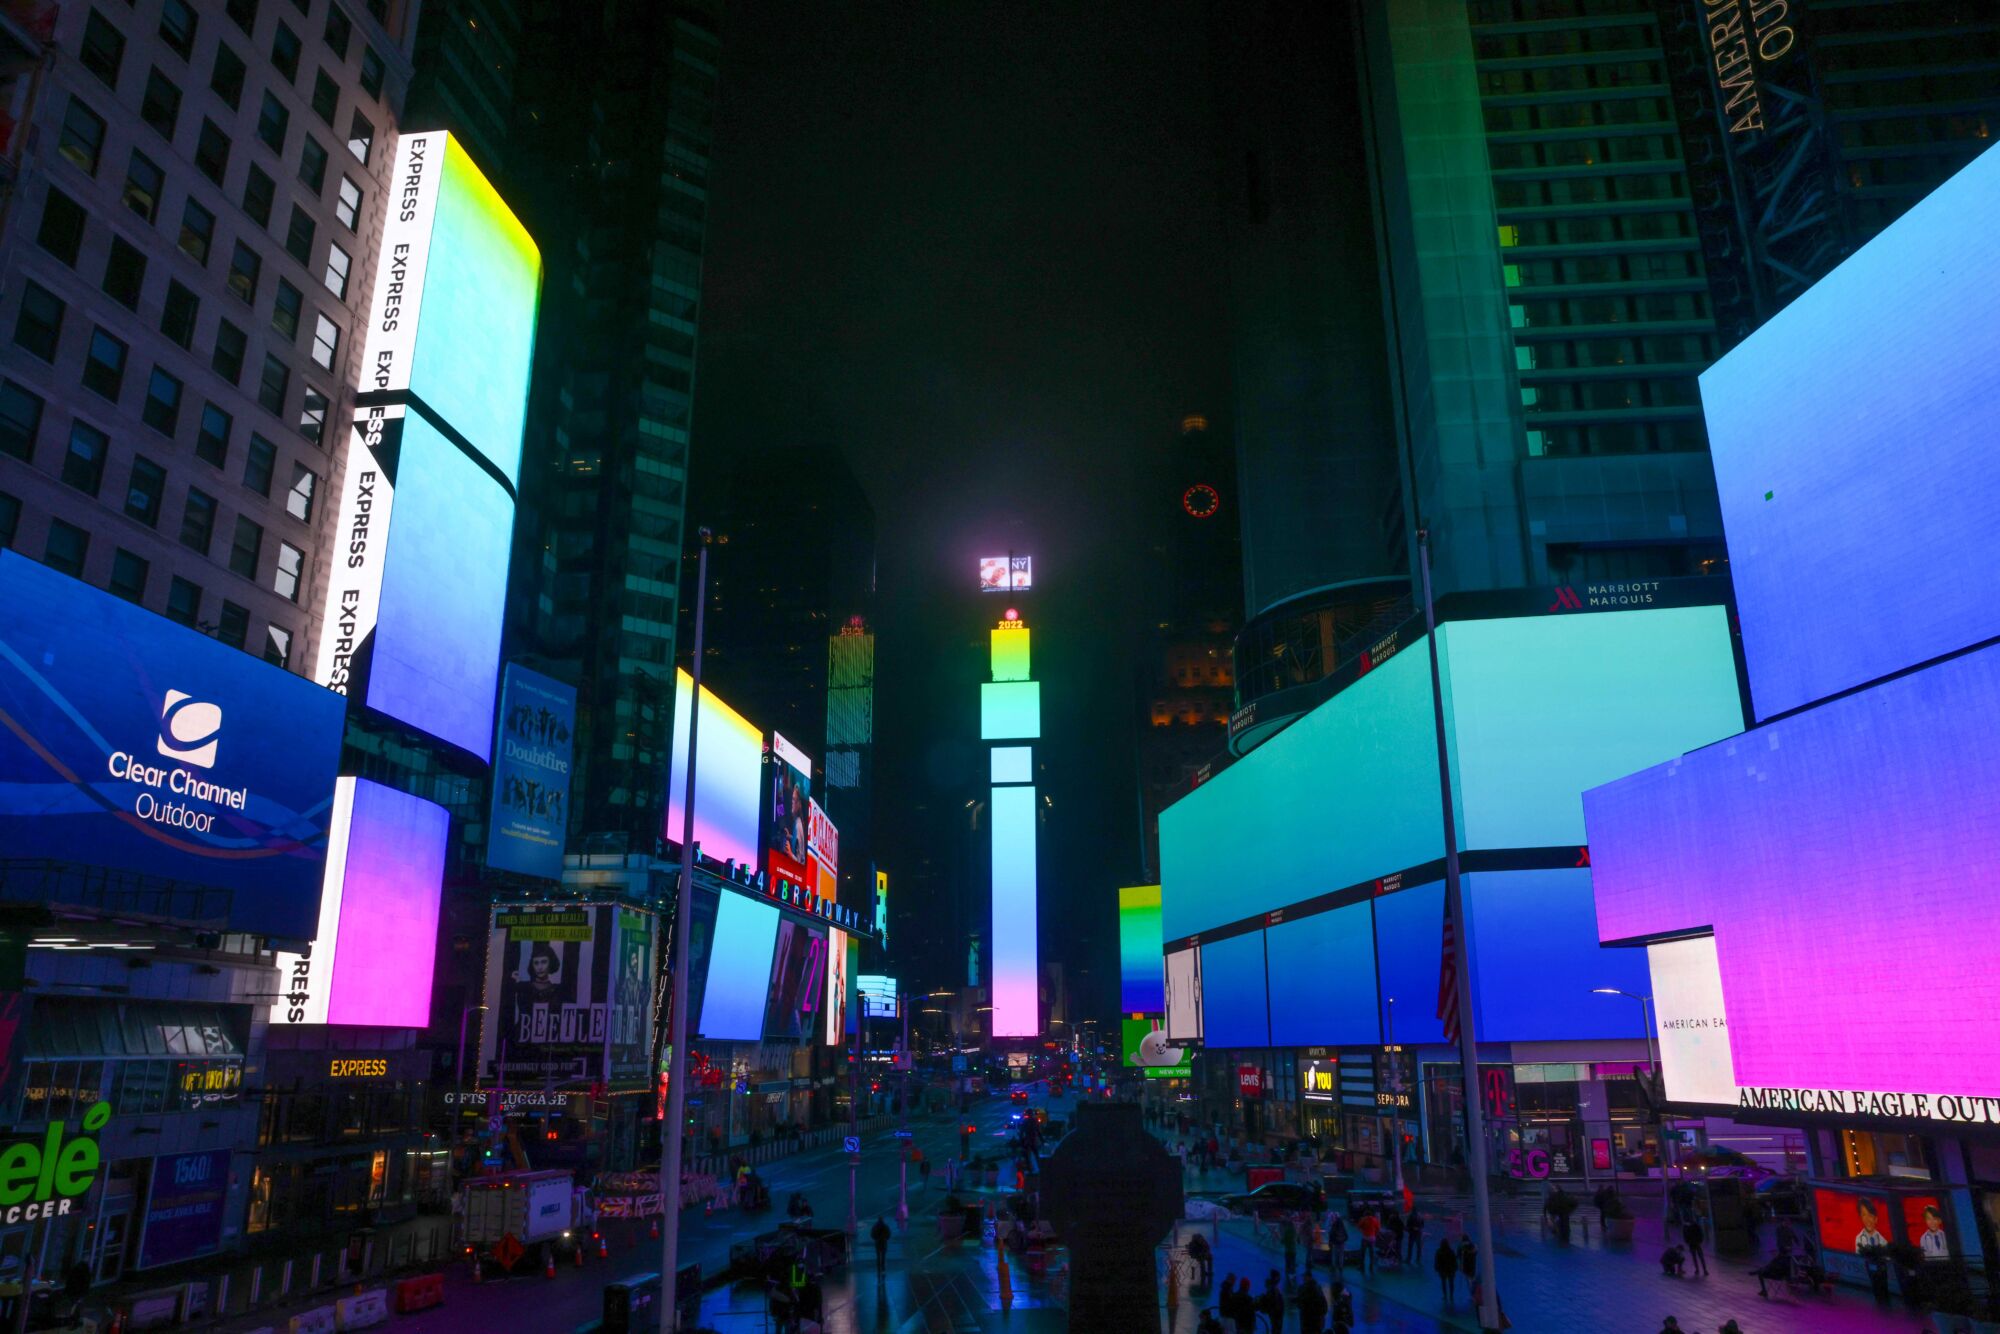 The Wick - Krista Kim, Continuum Times Square- Credited to Michael hull Courtesy of Times Square Arts